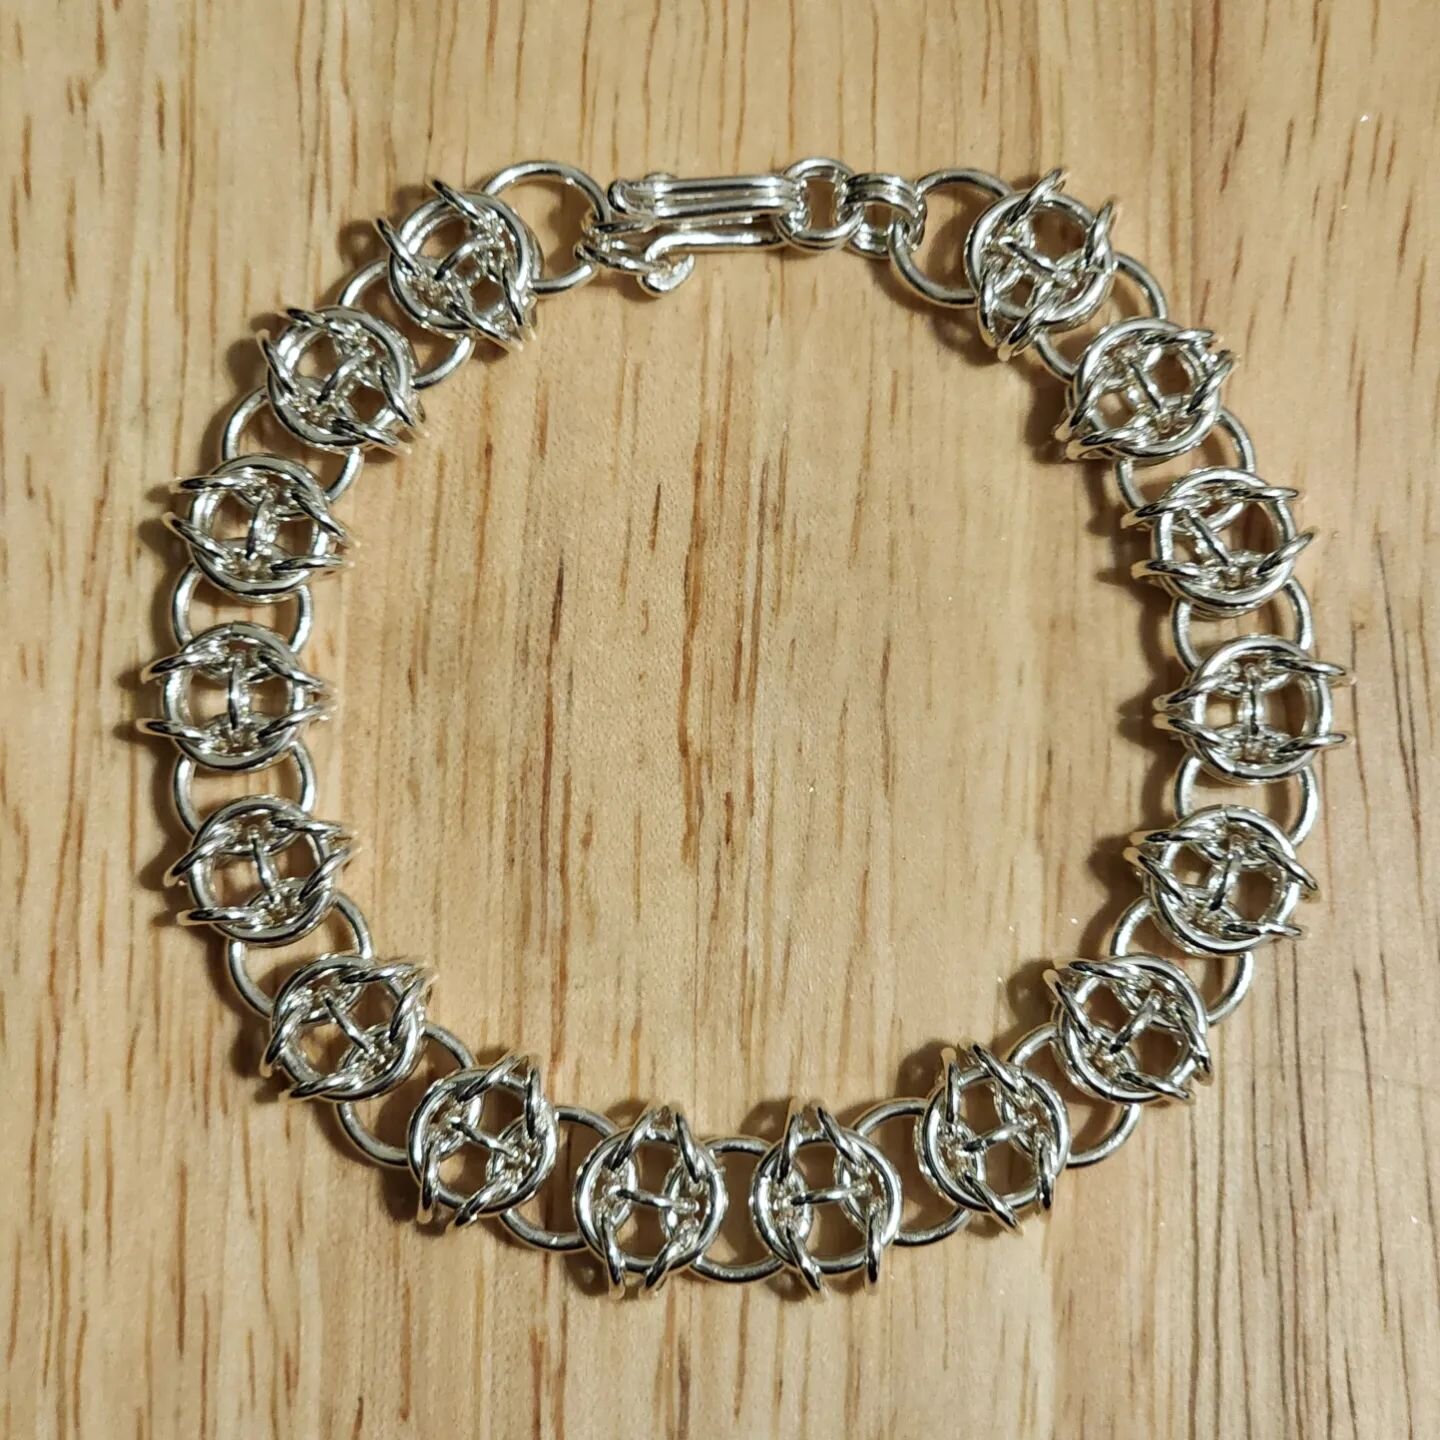 Happy New Year!!! Continuing with a theme, my first piece of 2023 is chain mail (chainmail, chainmaille, whichever you prefer), after my last piece of 2022 being chain mail. This pattern is called Celtic Visions. It is made with 16 gauge 6.5 mm and 1